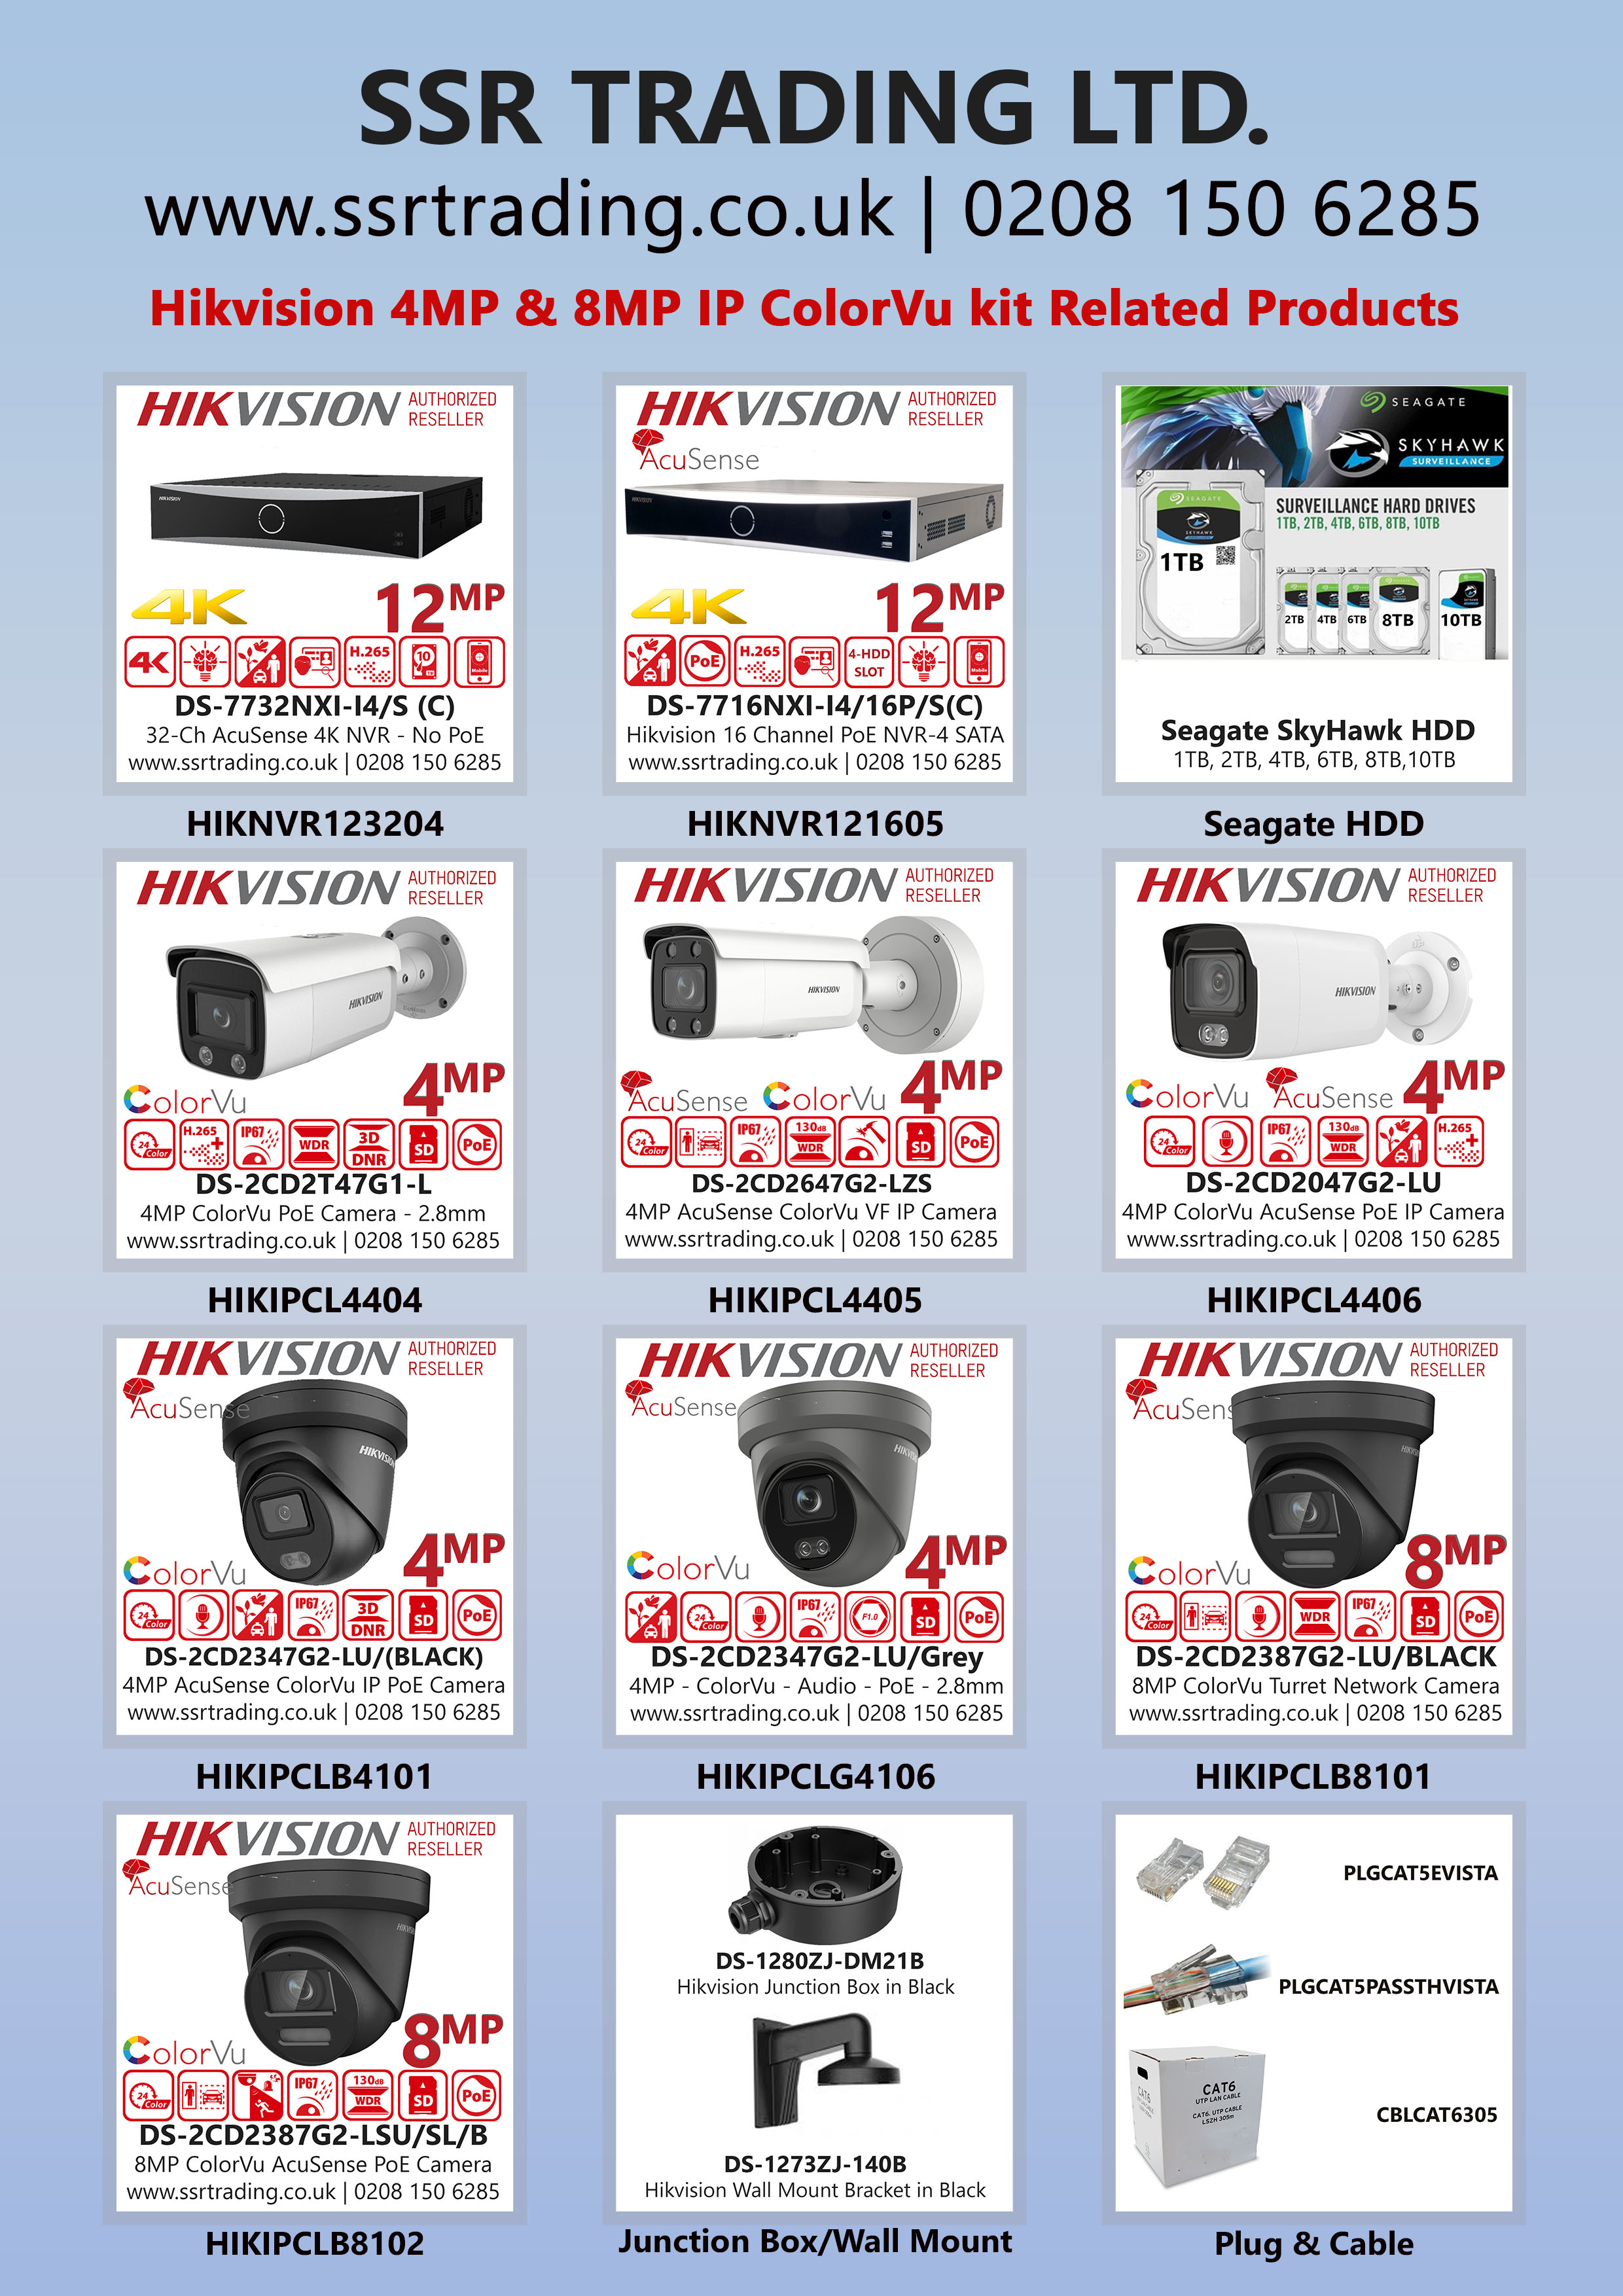 1-hikvision-4mp-8mp-ip-colorvu-kit-related-products.jpg